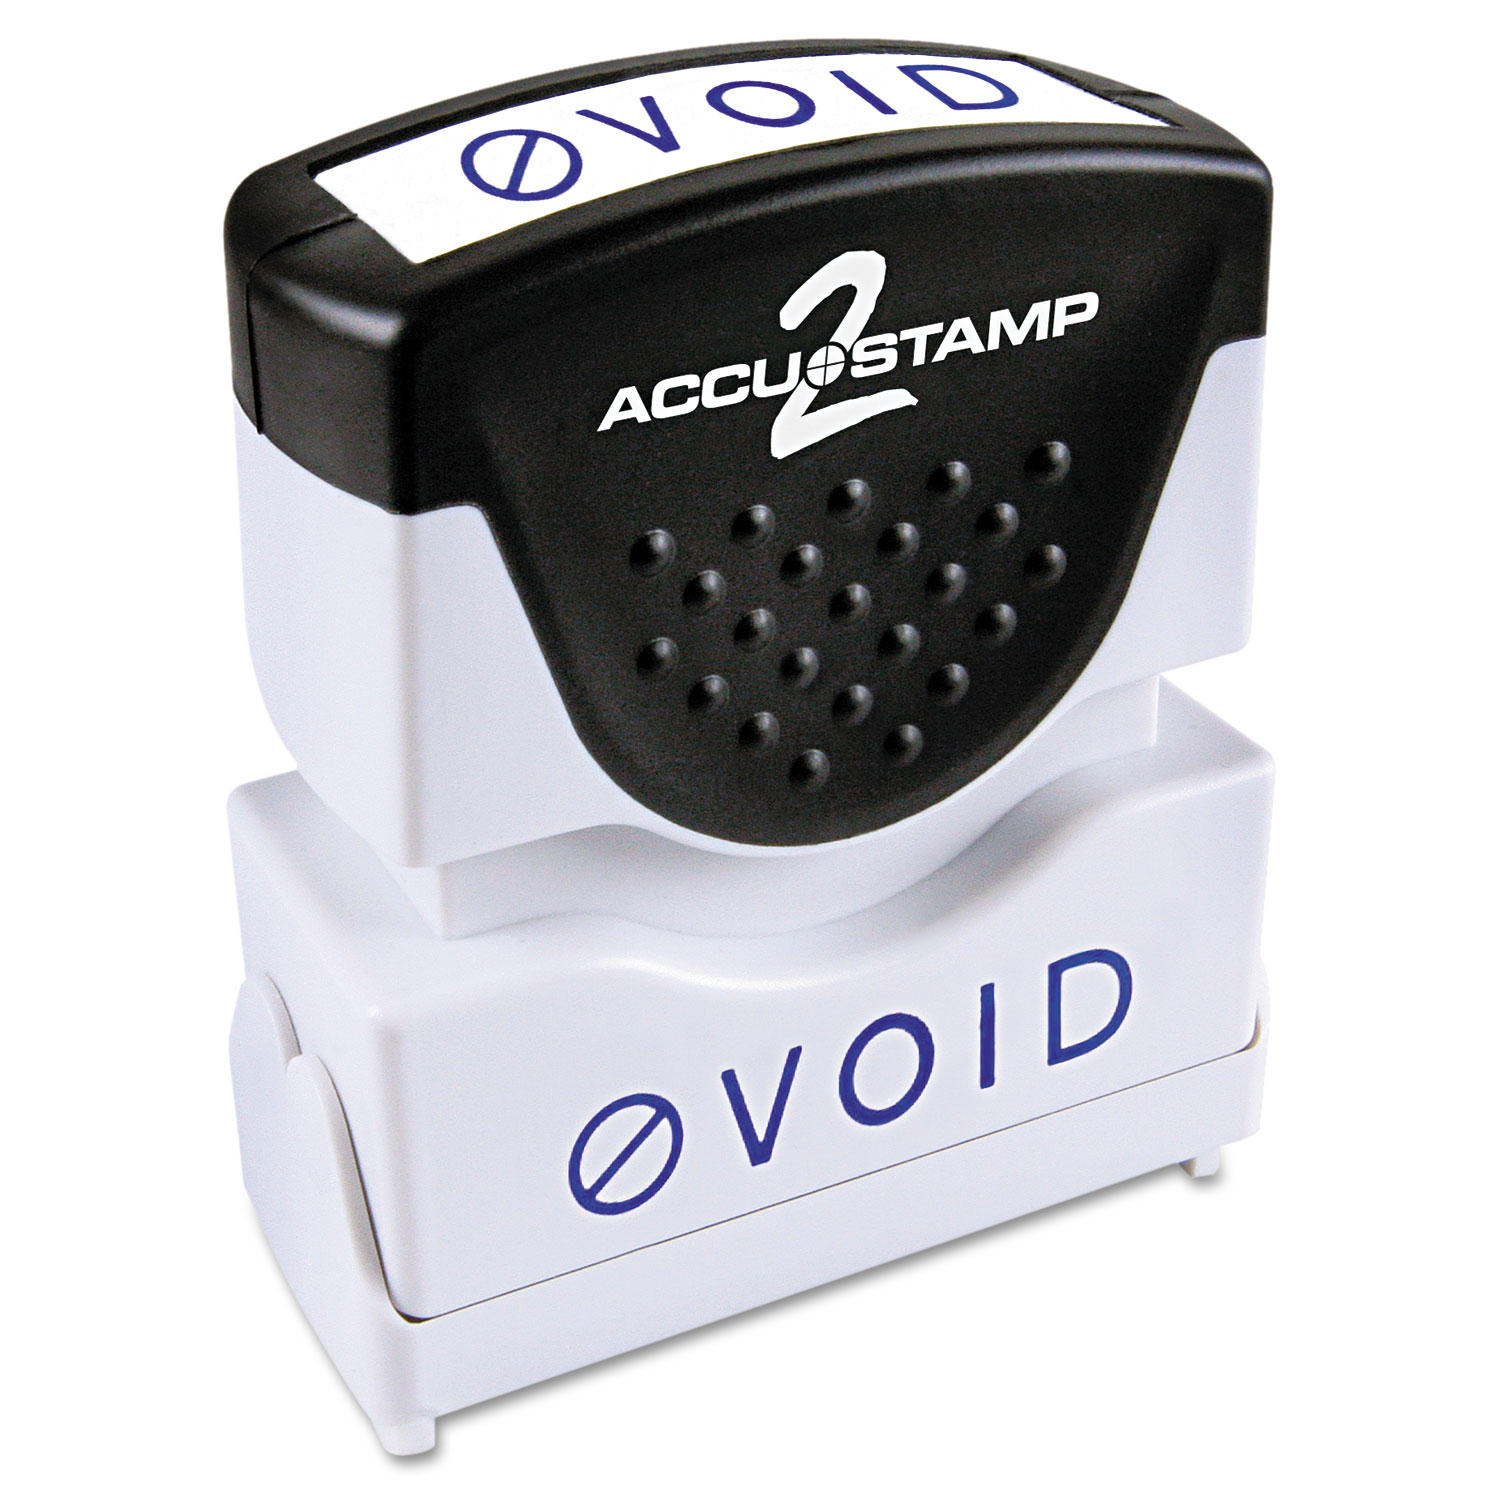  ACCUSTAMP2 035584 Pre-Inked Shutter Stamp, Blue, VOID, 1 5/8 x 1/2 (COS035584) 